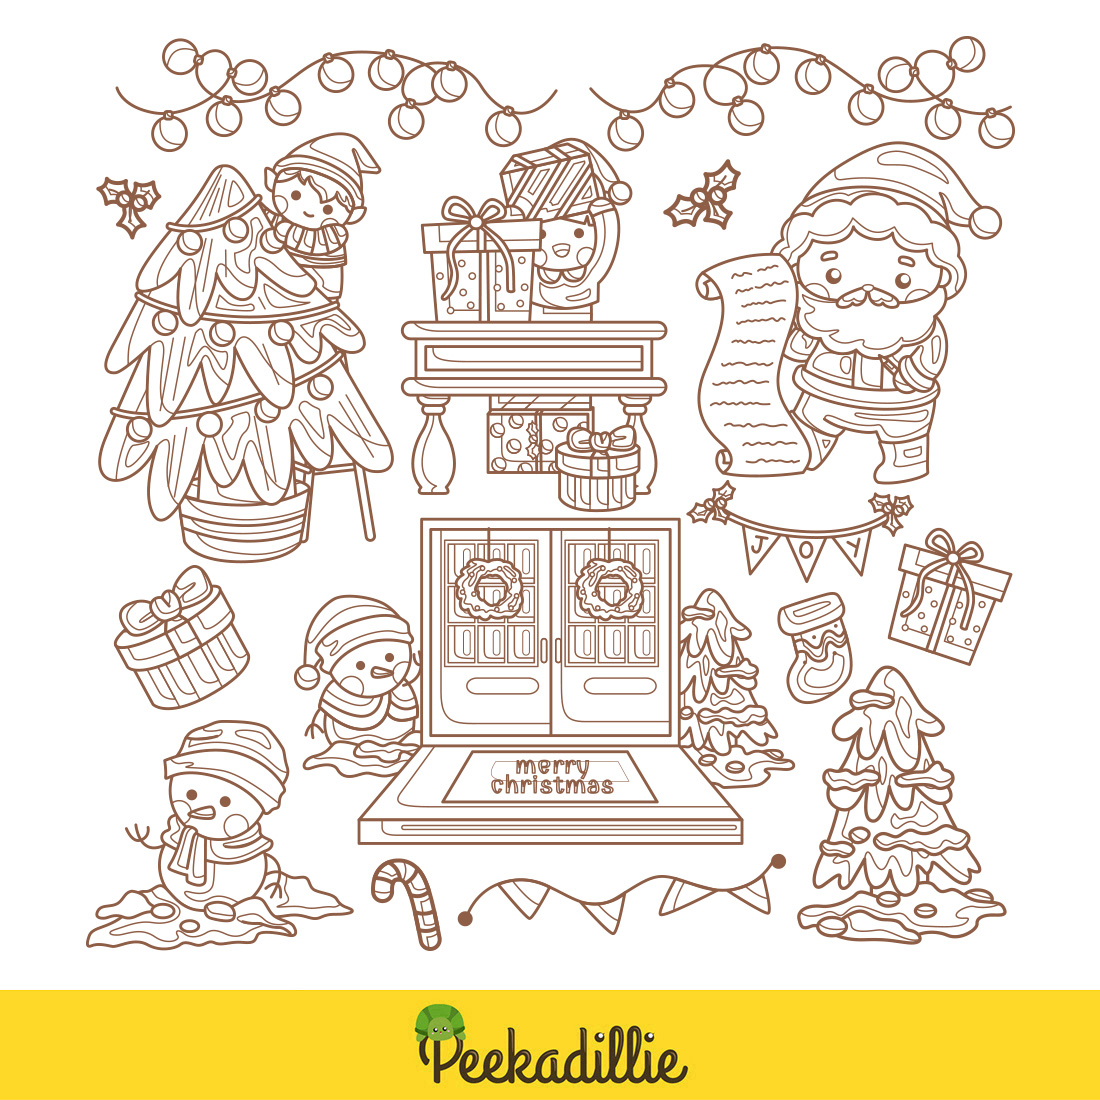 Decorated for Christmas Character Snowman Santa Claus Elf Holiday Decoration Background Cartoon Digital Stamp Outline preview image.